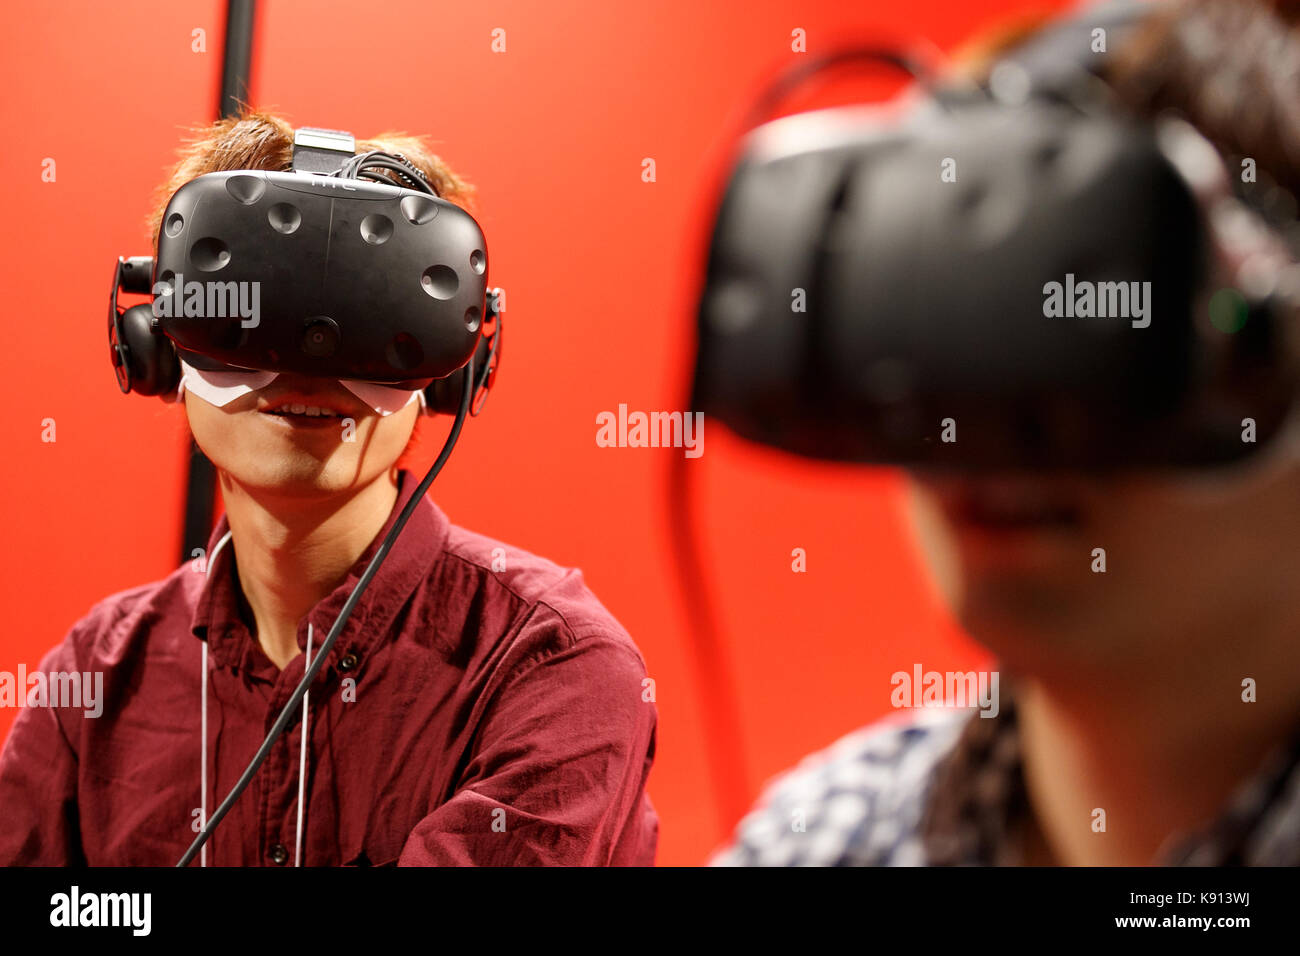 Chiba, Japan. 21st Sep, 2017. Visitors test a virtual reality glasses at the Tokyo Game Show (TGS 2017) on September 21, 2017, Chiba, Japan. This year's event hosts 609 companies from 36 different countries, introducing 1,317 video game titles for smartphones, games consoles, VR, AR and MR platforms. The show, which expects to attract 250,000 visitors, runs until September 24 at the International Convention Complex Makuhari Messe in Chiba; and will be streamed live around the world. Credit: Rodrigo Reyes Marin/AFLO/Alamy Live News Stock Photo